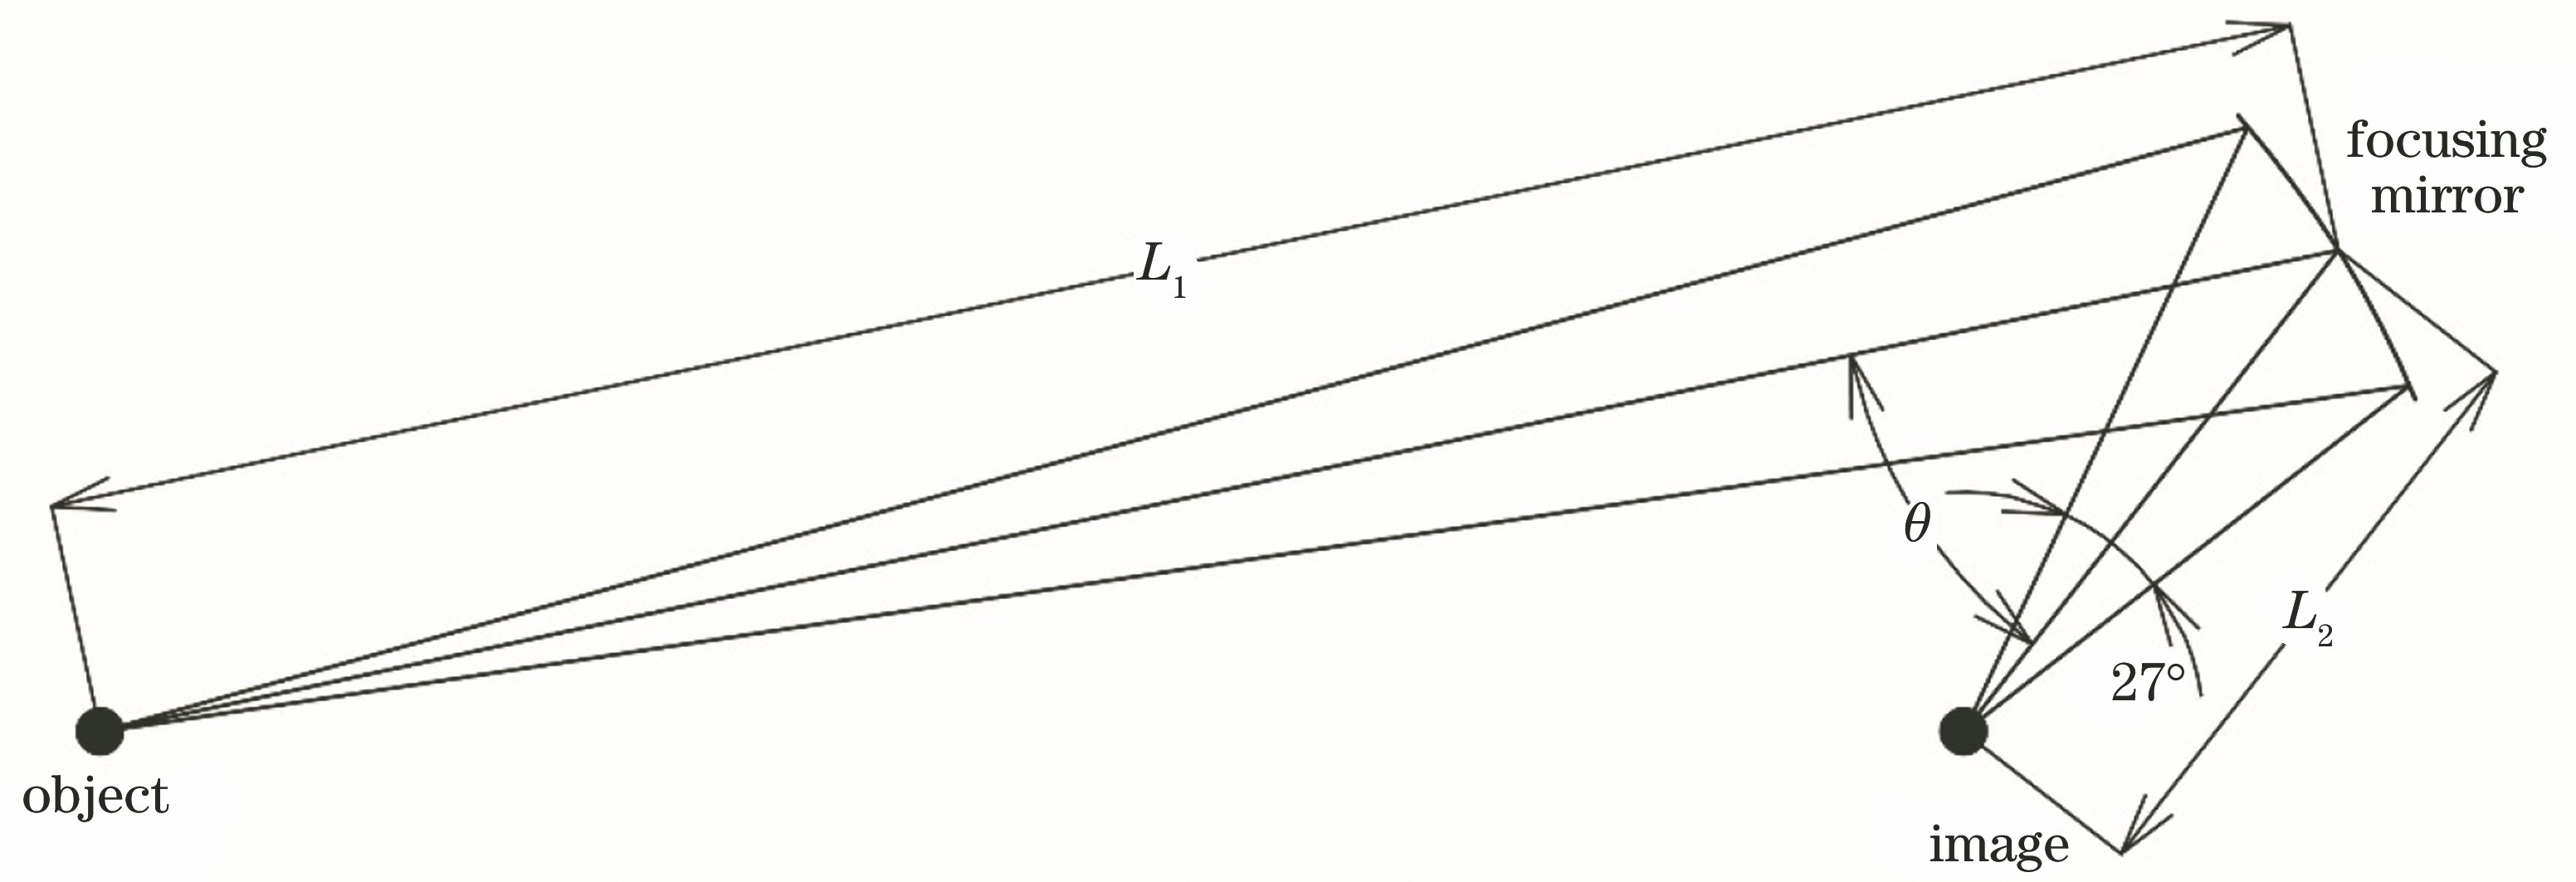 Optical path of the focusing mirror